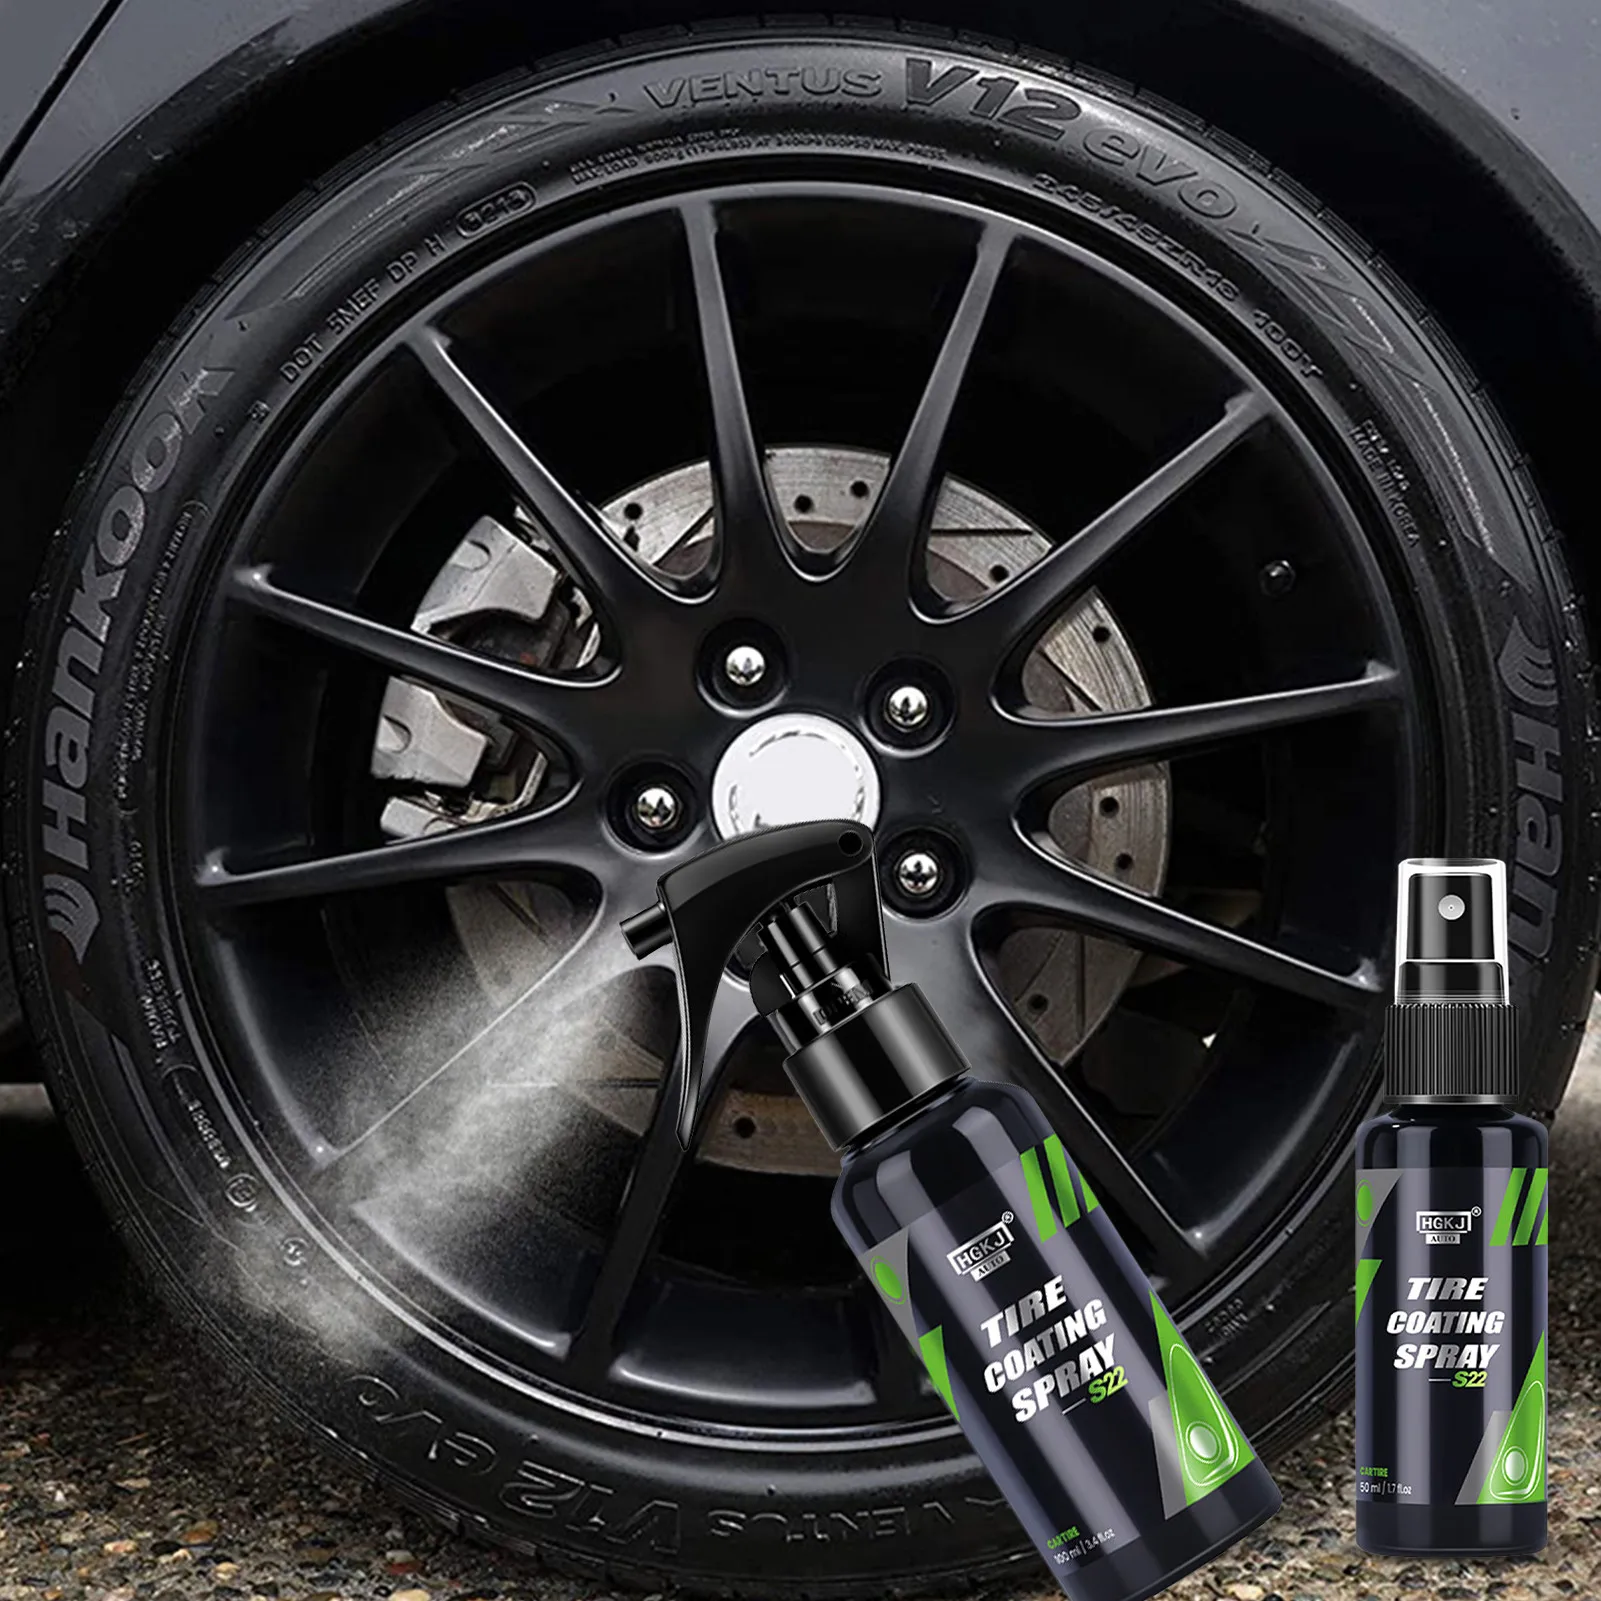 

50ml/100ml Black Wet Tyre Gloss HGKJ Tire Coating Spray AUTO-S22 Shine Crystal Wax Spray Quality Car Cleaning Products